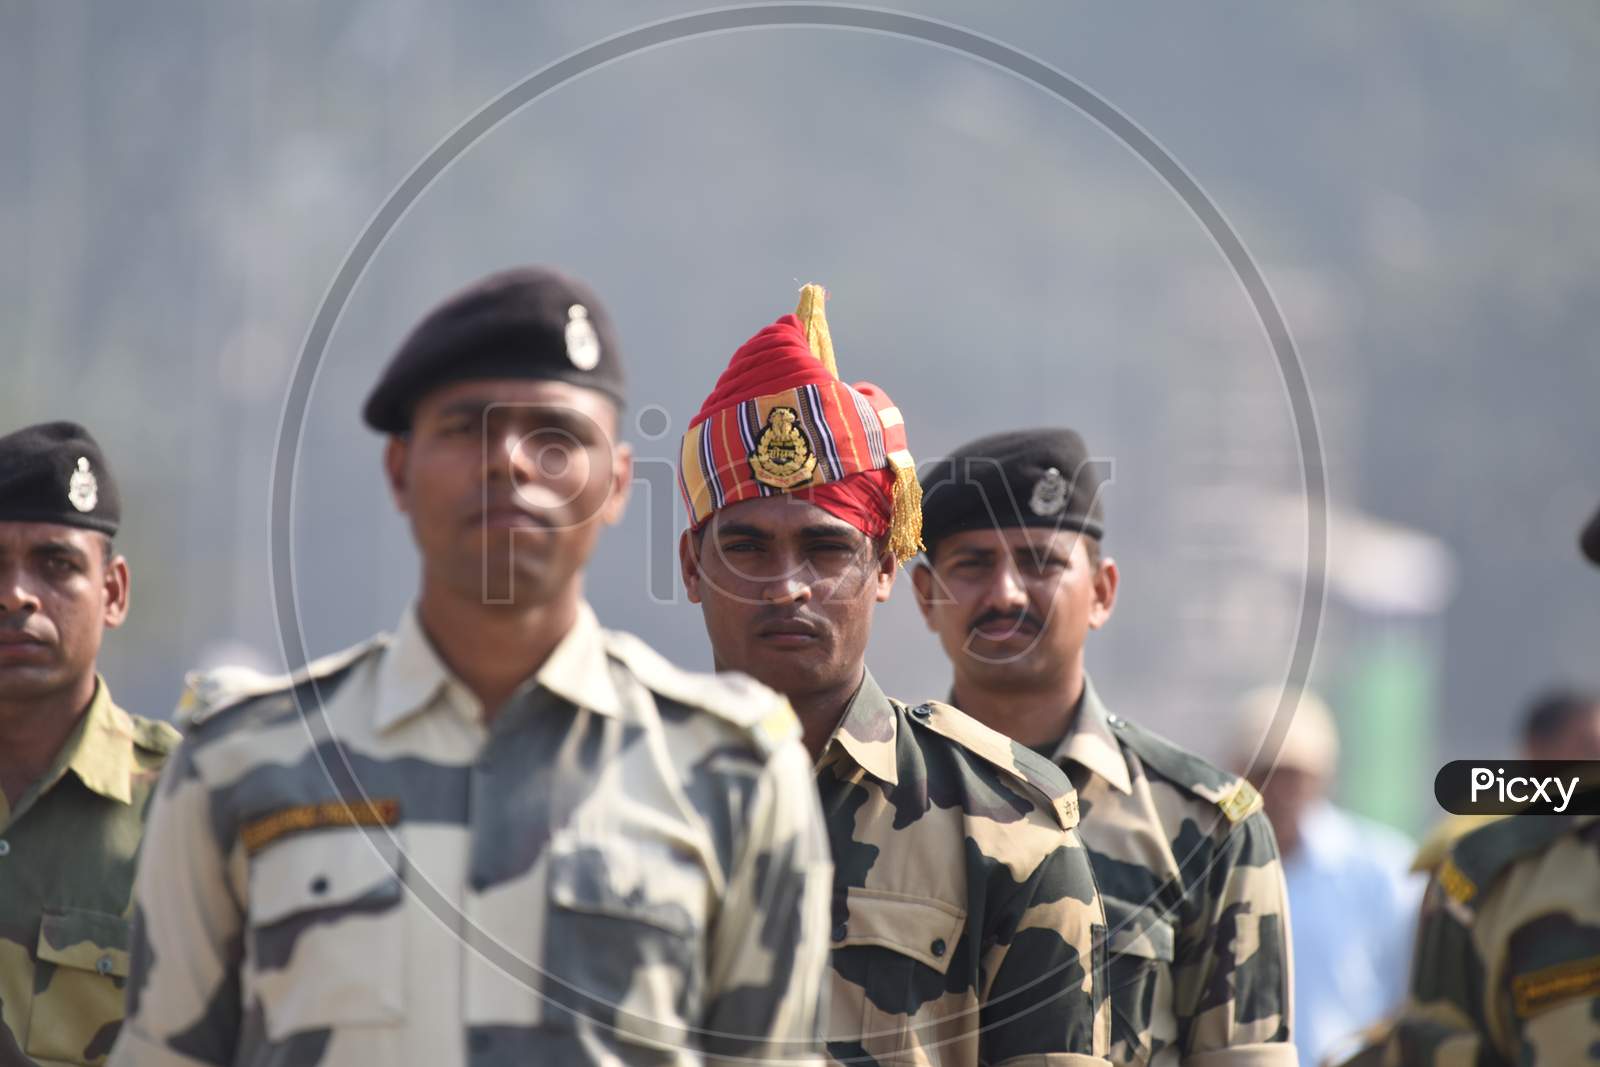 Police and Army  Cadet Personal Practicing March For Republic Day Parade in Khanapara, Guwahati, Assam